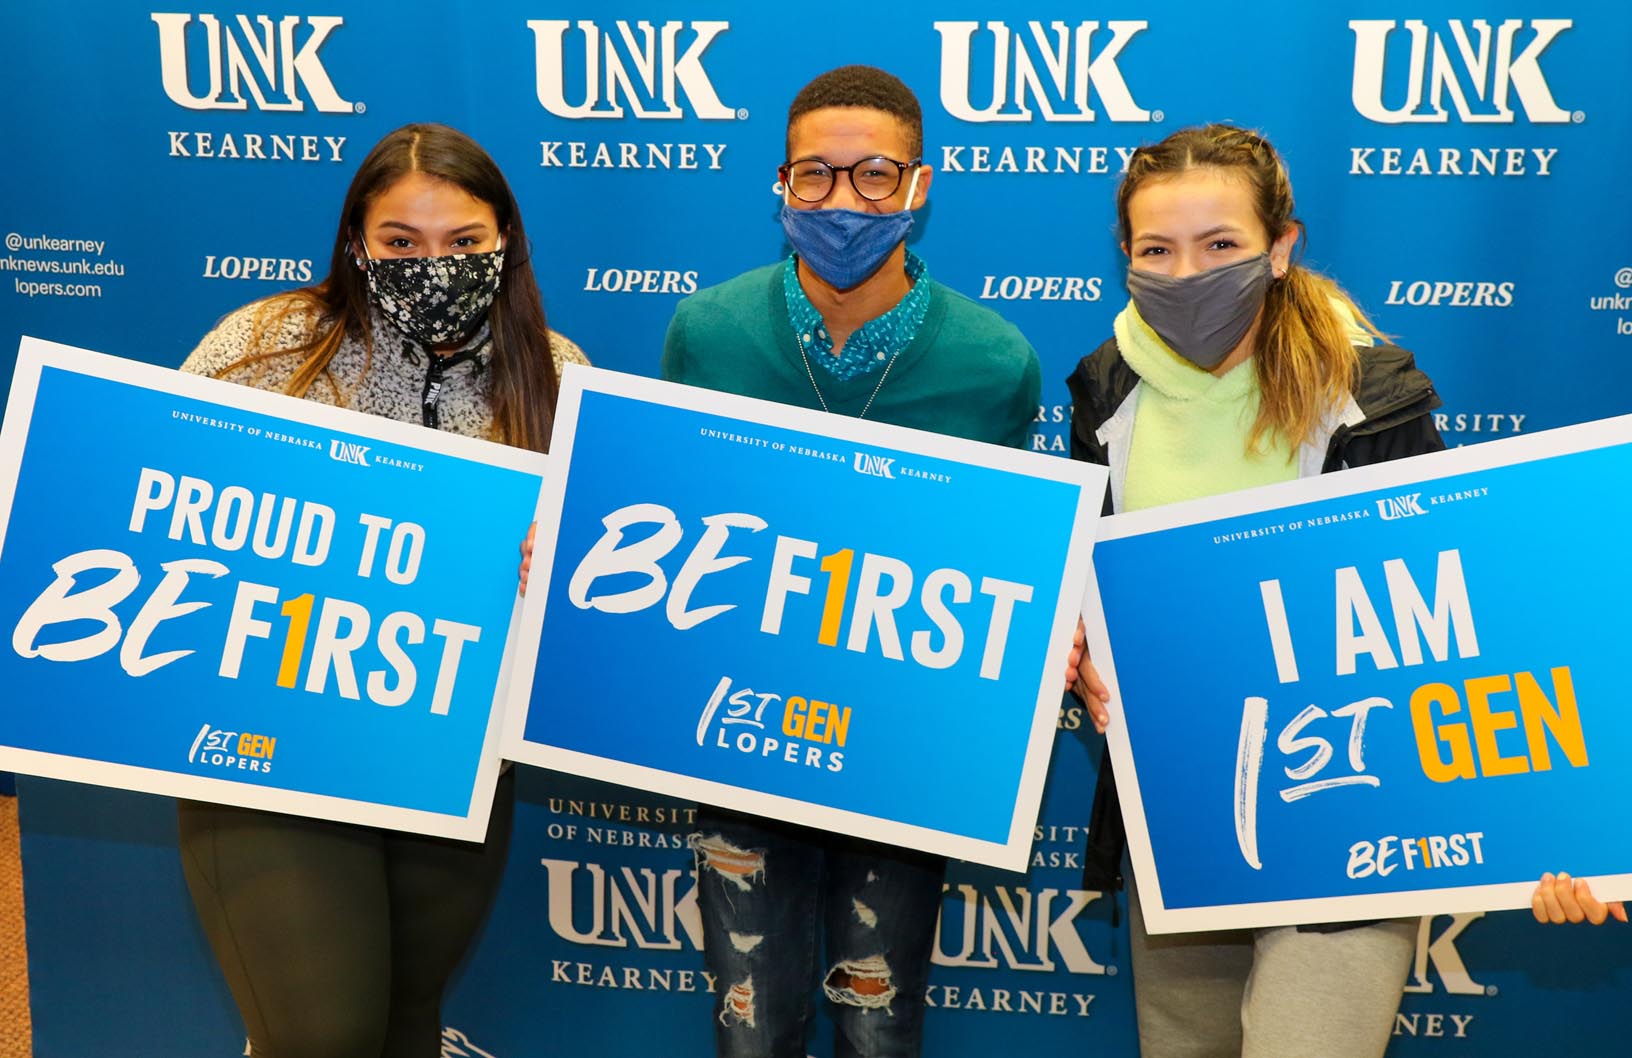 UNK hosted its second annual First Gen Day on Monday. The event celebrates the success of first-generation faculty, staff and students and highlights the opportunities available at UNK. (Photos by Todd Gottula, UNK Communications)